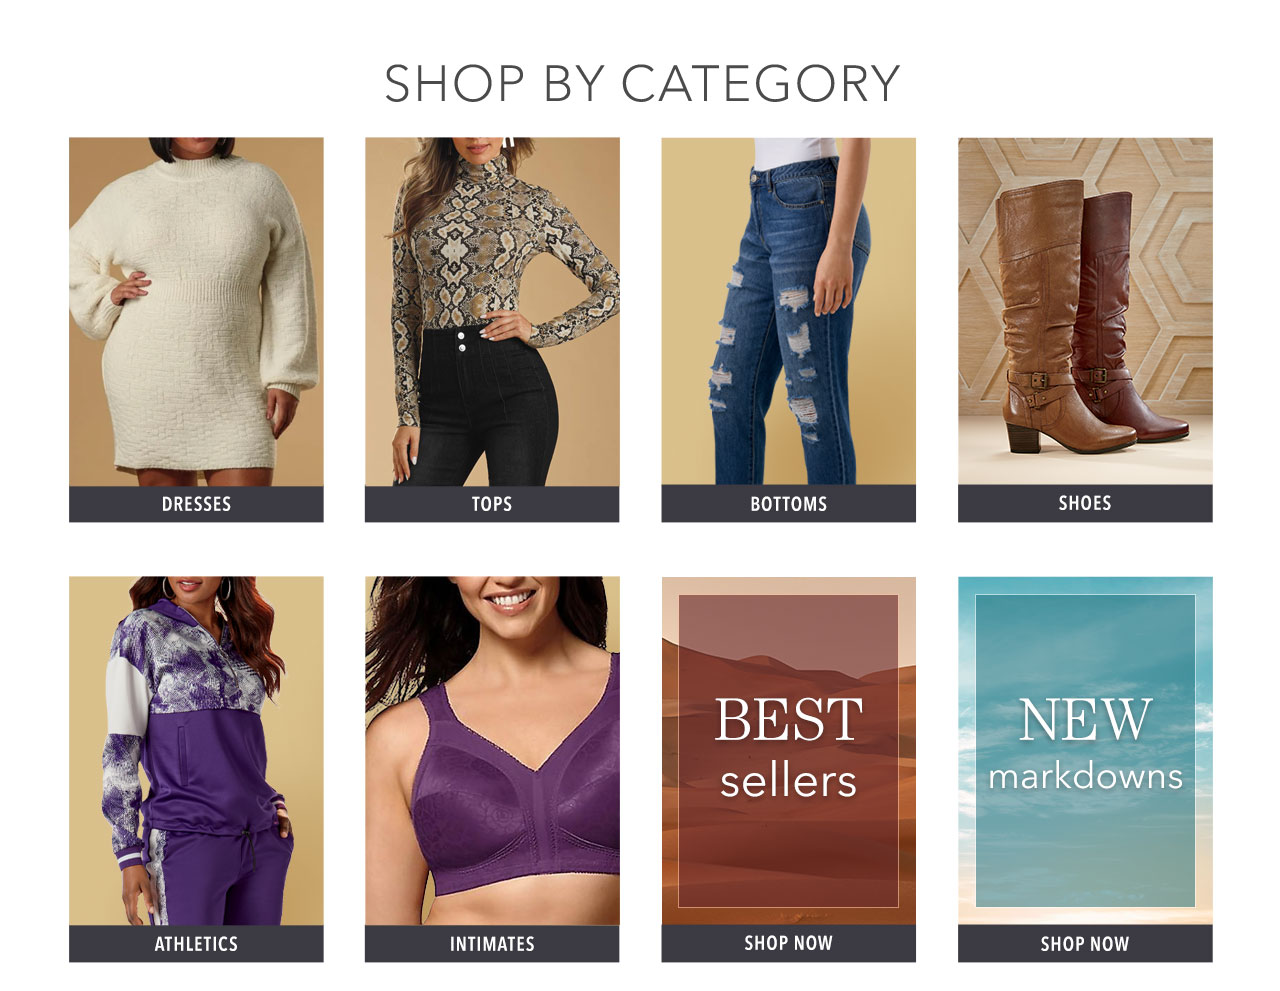 Shop dresses, tops, bottoms, shoes, athletics, intimates, best sellers, and clearance.